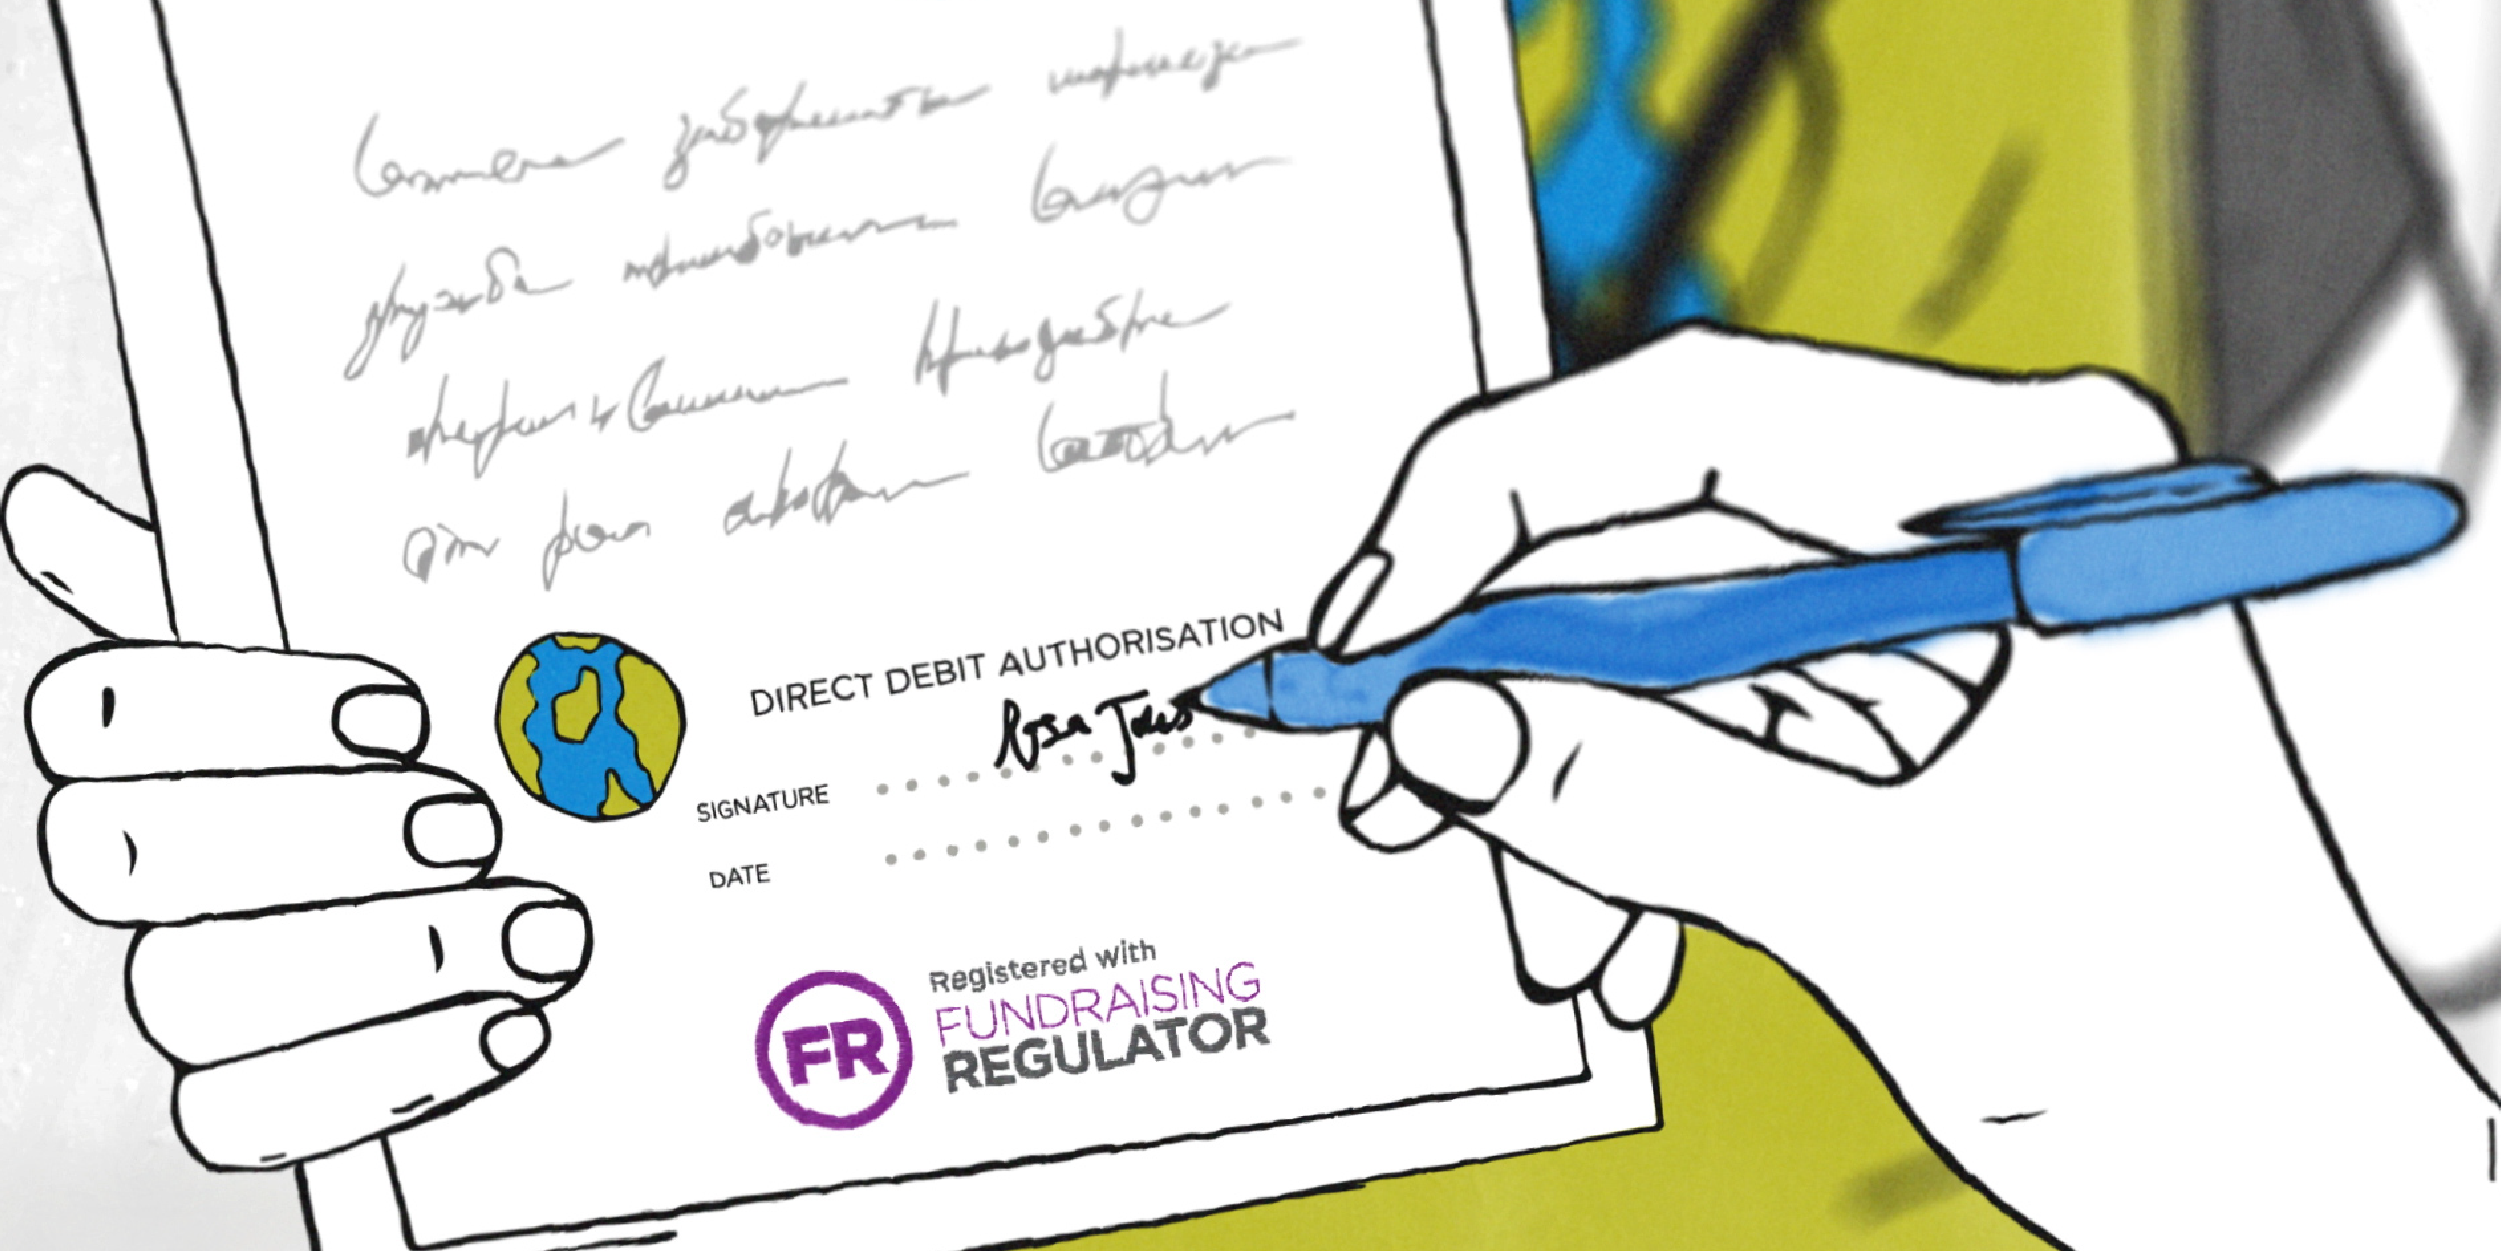 Image shows a person signing a form with the Fundraising Badge at the bottom